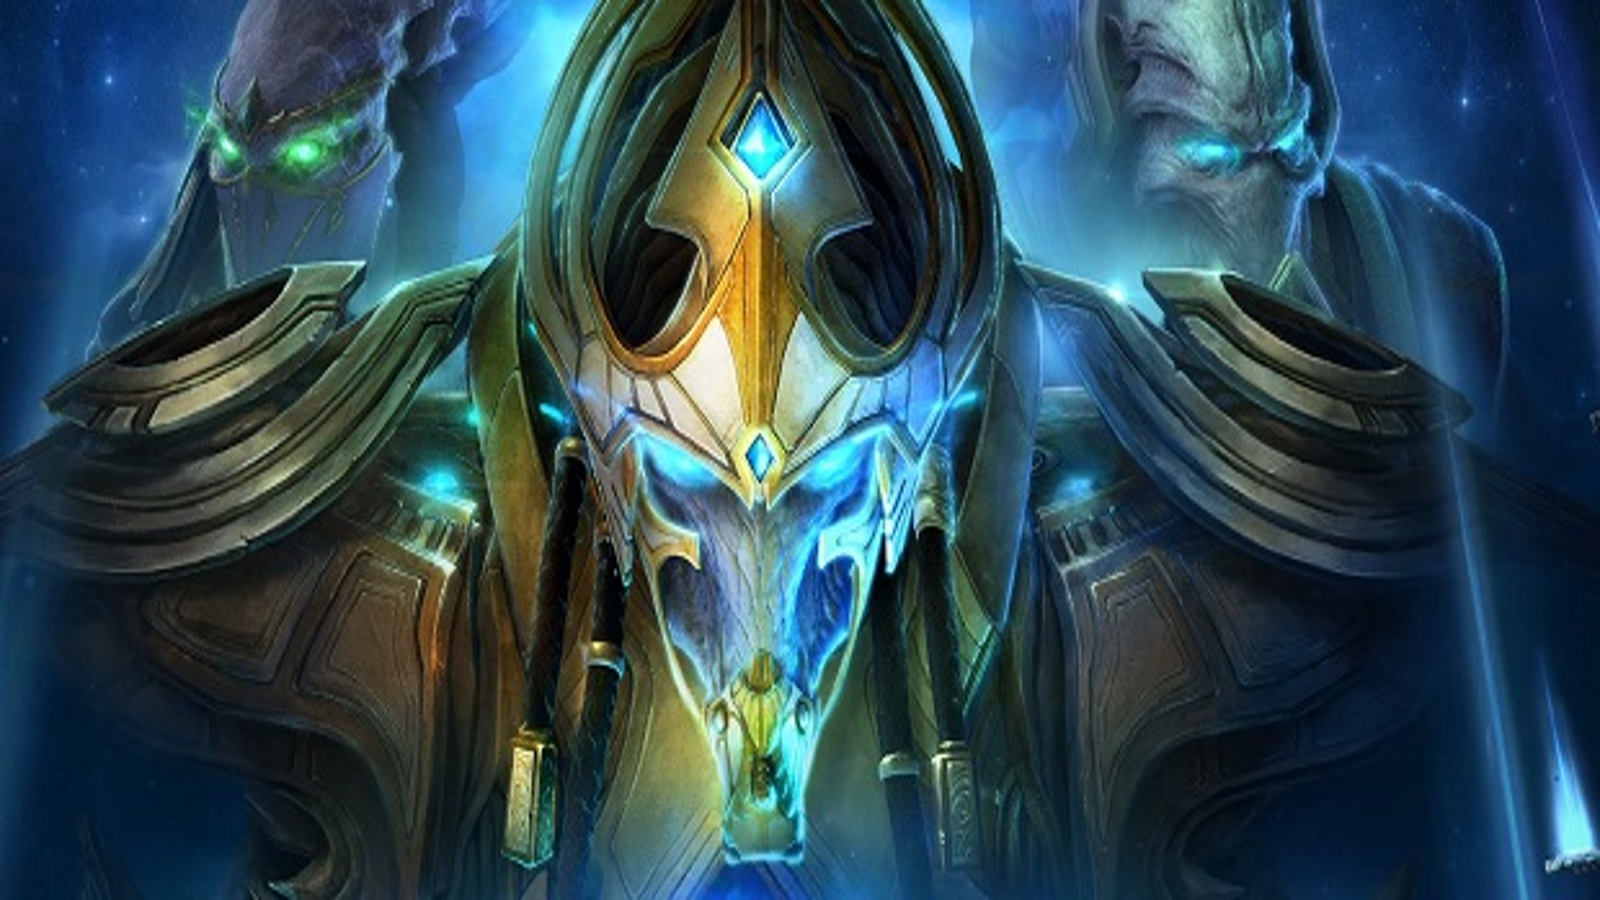 Preview: Starcraft II - Legacy of the Void